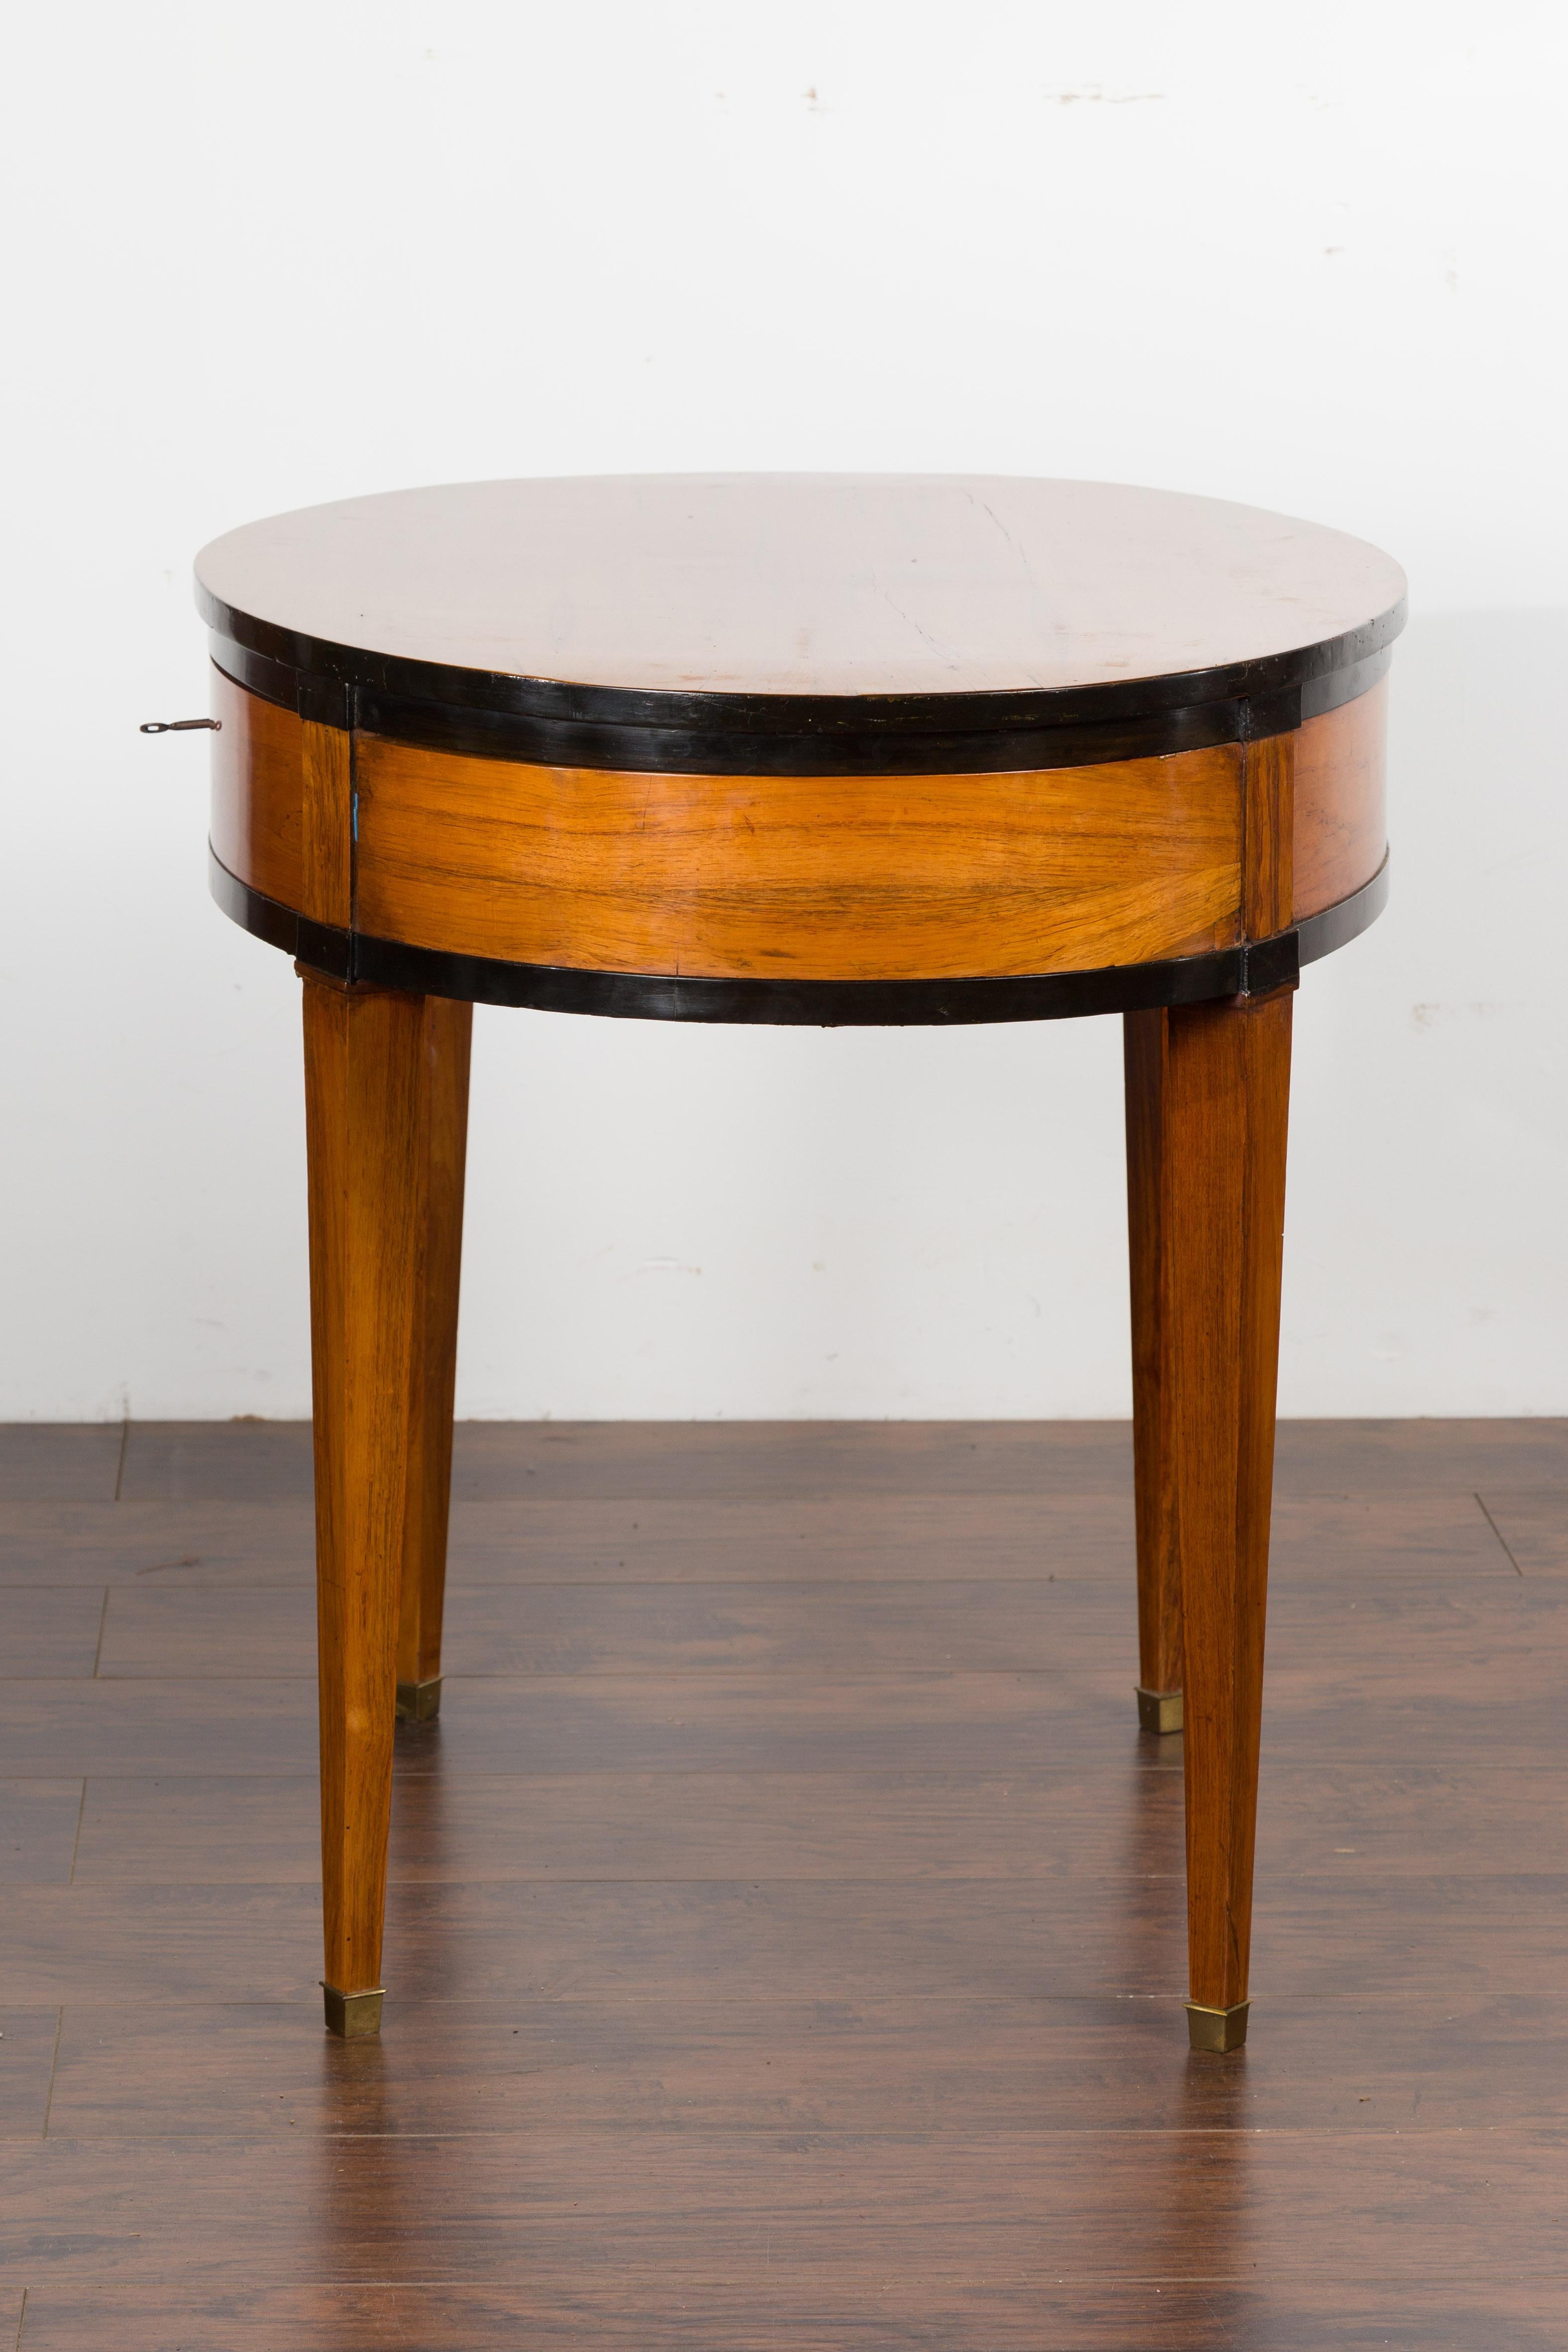 Austrian 1840s Biedermeier Oval Top Table with Drawer and Ebonized Accents 8